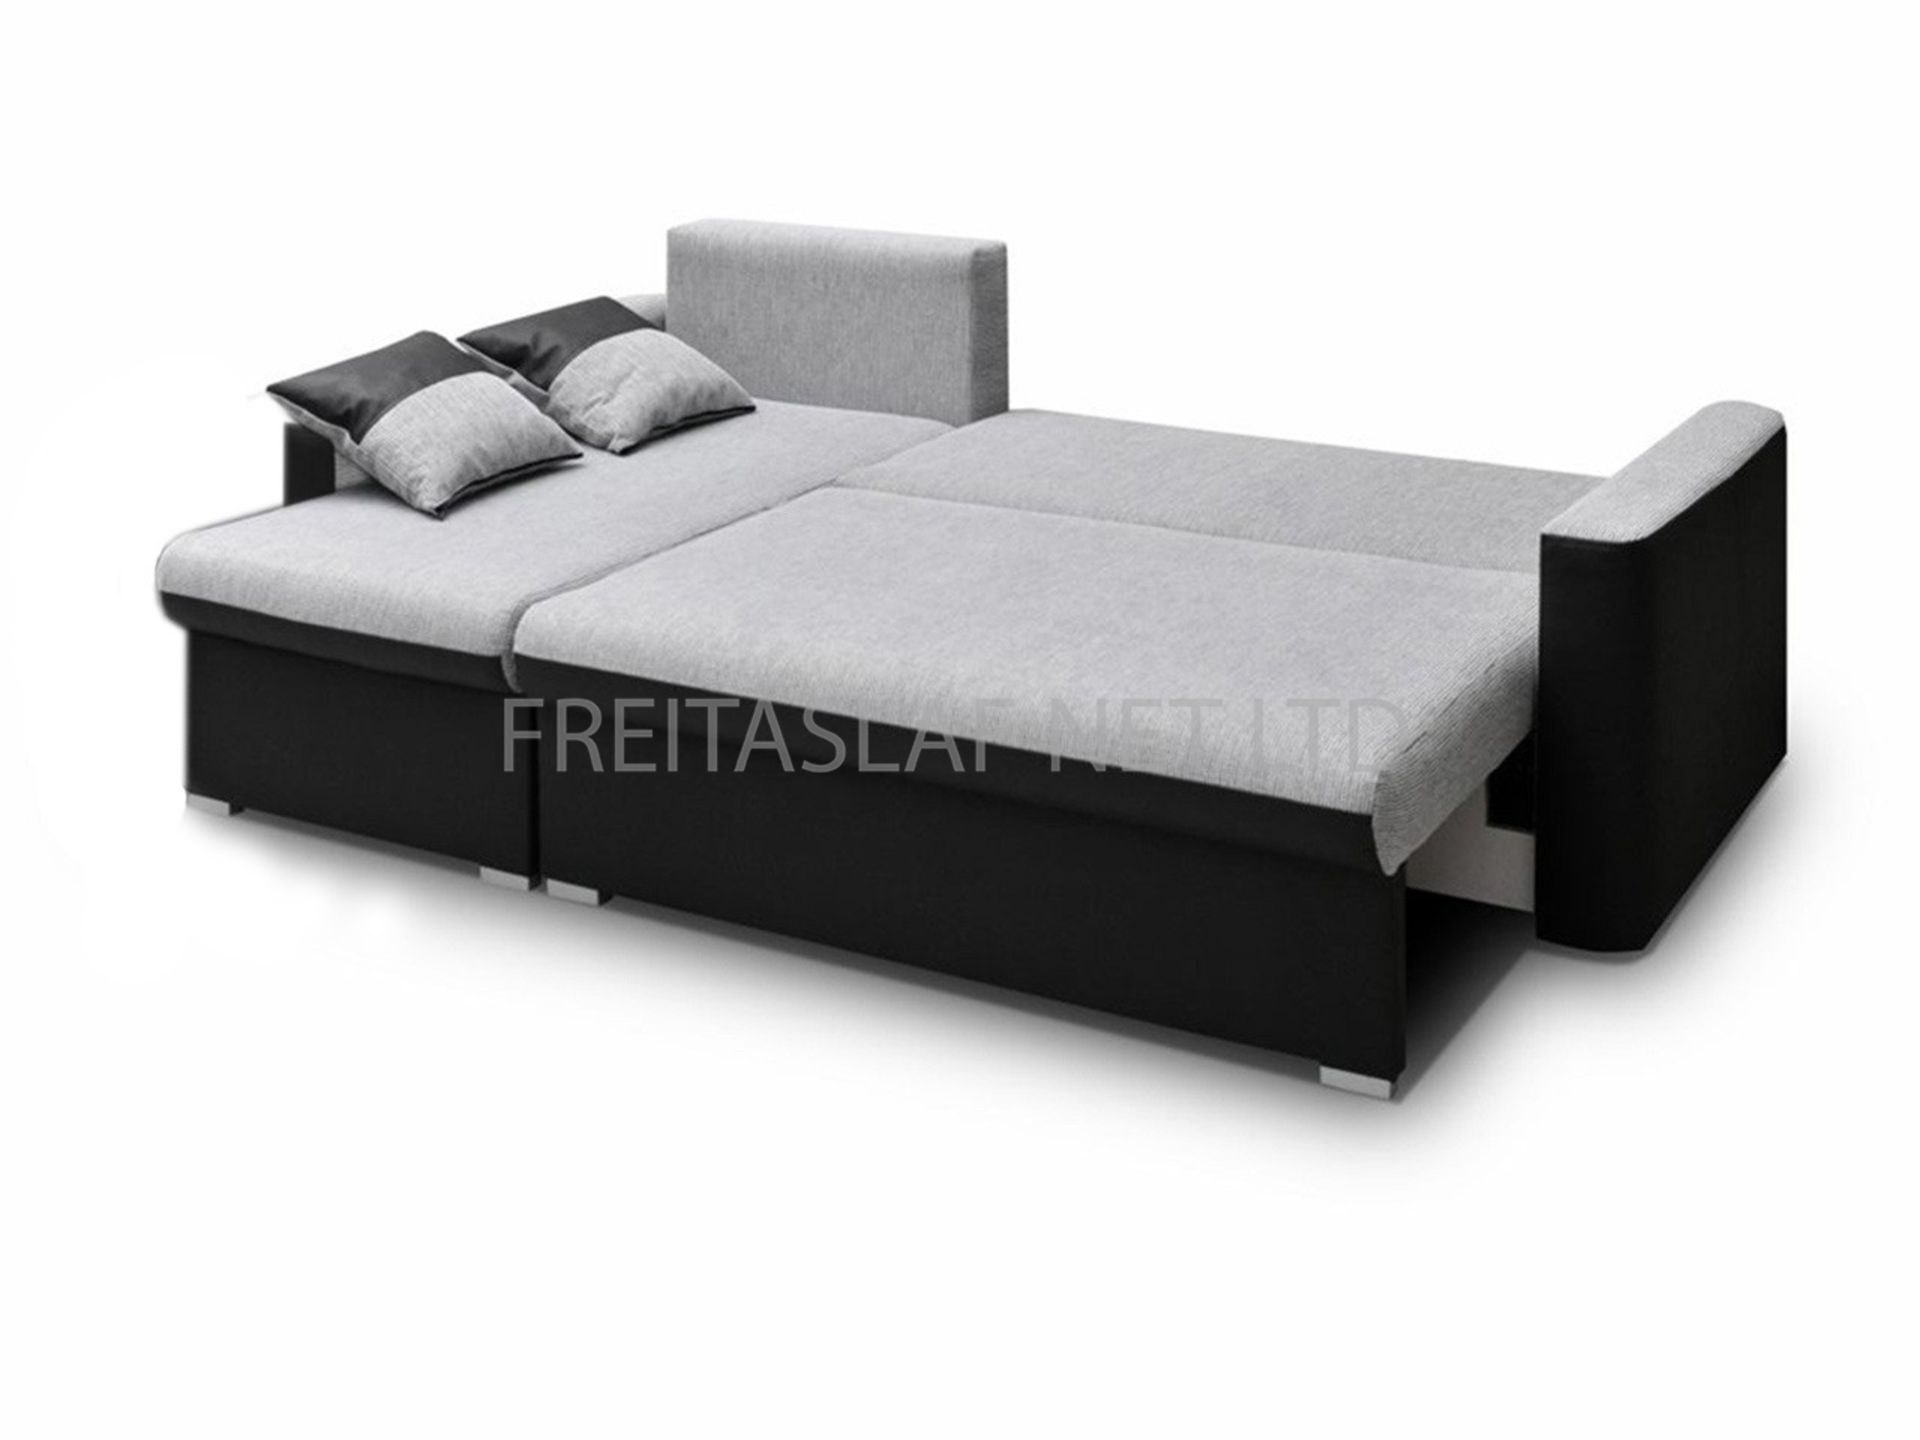 Flàvio corner sofa bed right hand facing in black and grey faux leather - Image 2 of 3